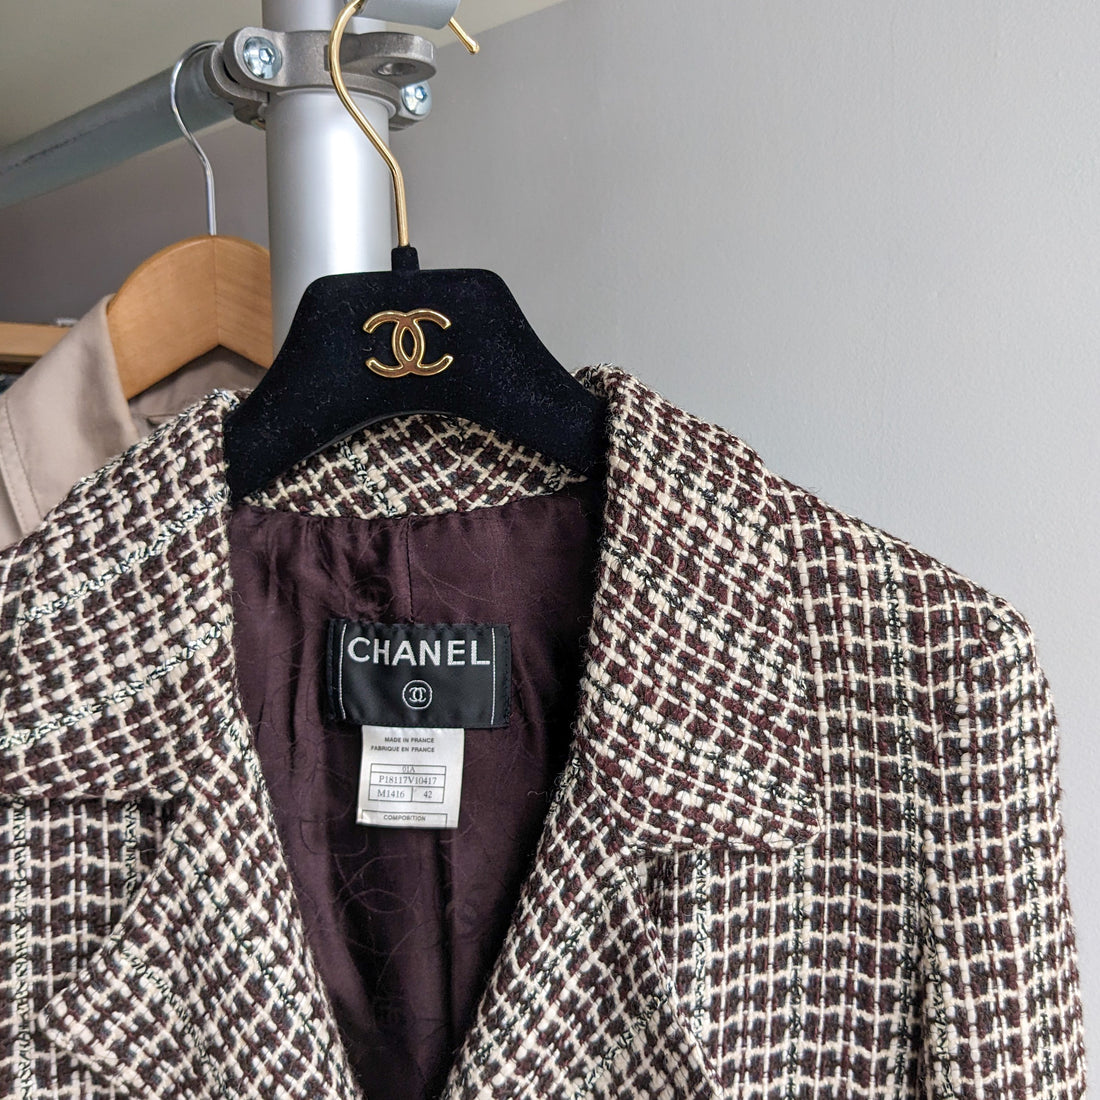 1995 Vintage Chanel Tweed Jacket with Playing Cards Motif at 1stDibs  chanel  tweed jacket vintage chanel jacket vintage chanel vintage jacket